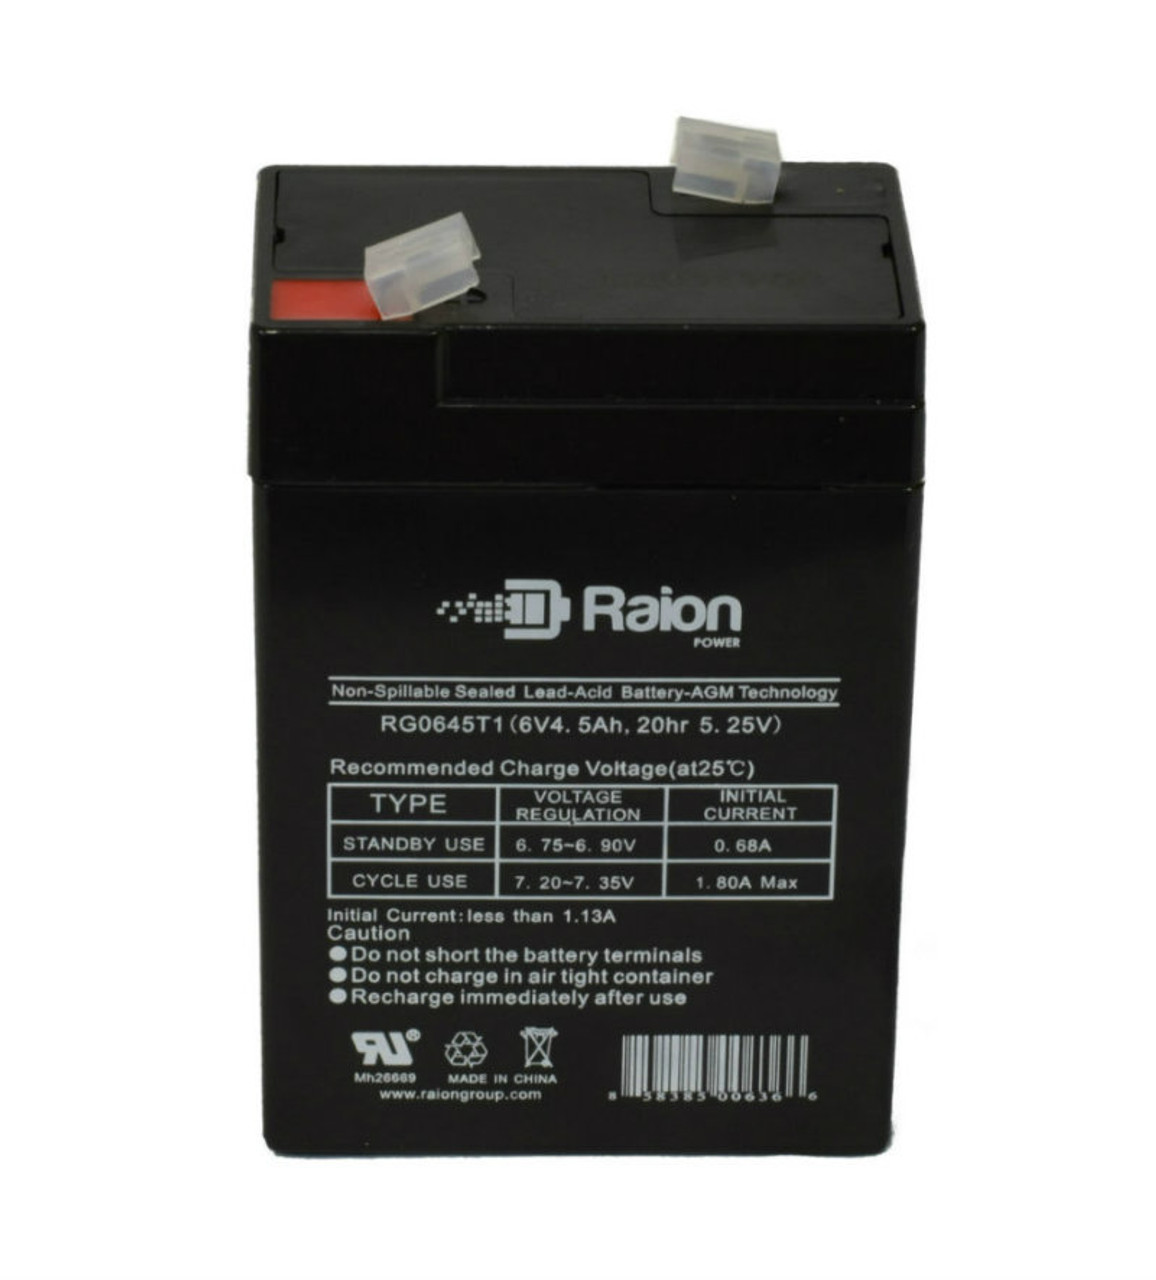 Raion Power RG0645T1 Replacement Battery Cartridge for Motoma MS6V4